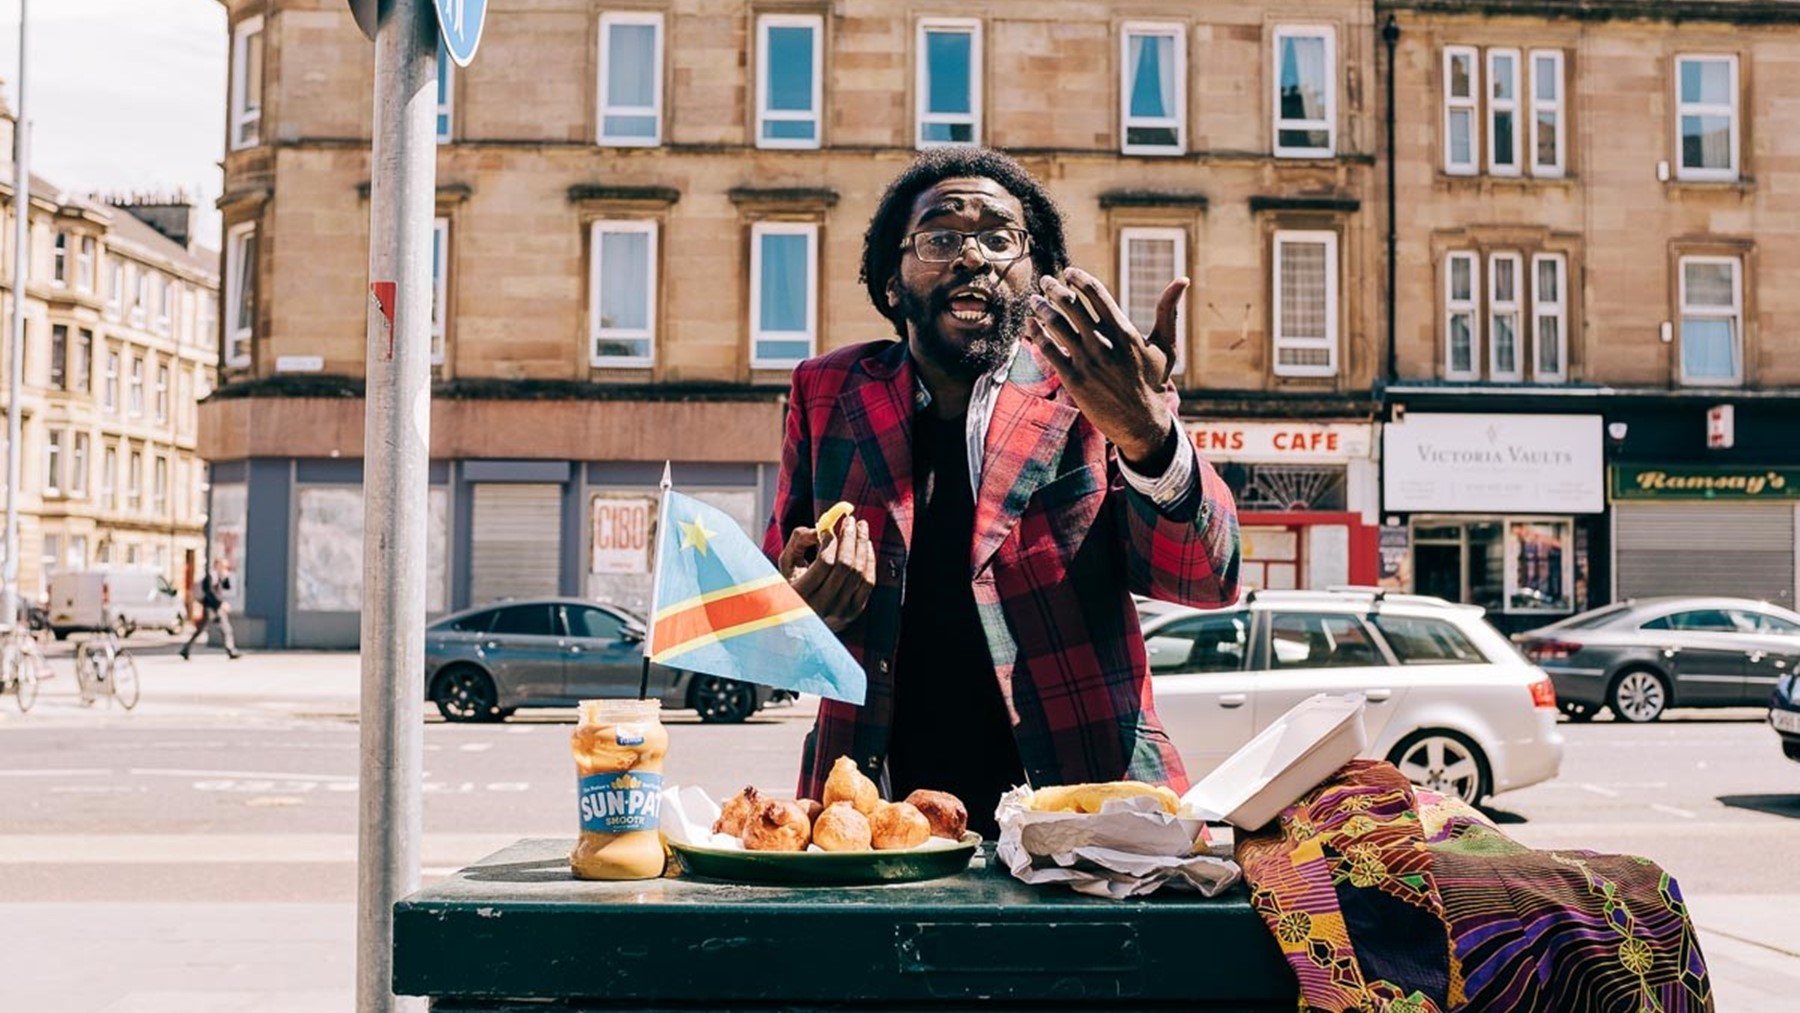 A performer raises his hand expressively to the viewer. He stands behind a table sitting in an urban street. It bears a plate of fried food and a Congolese flag.